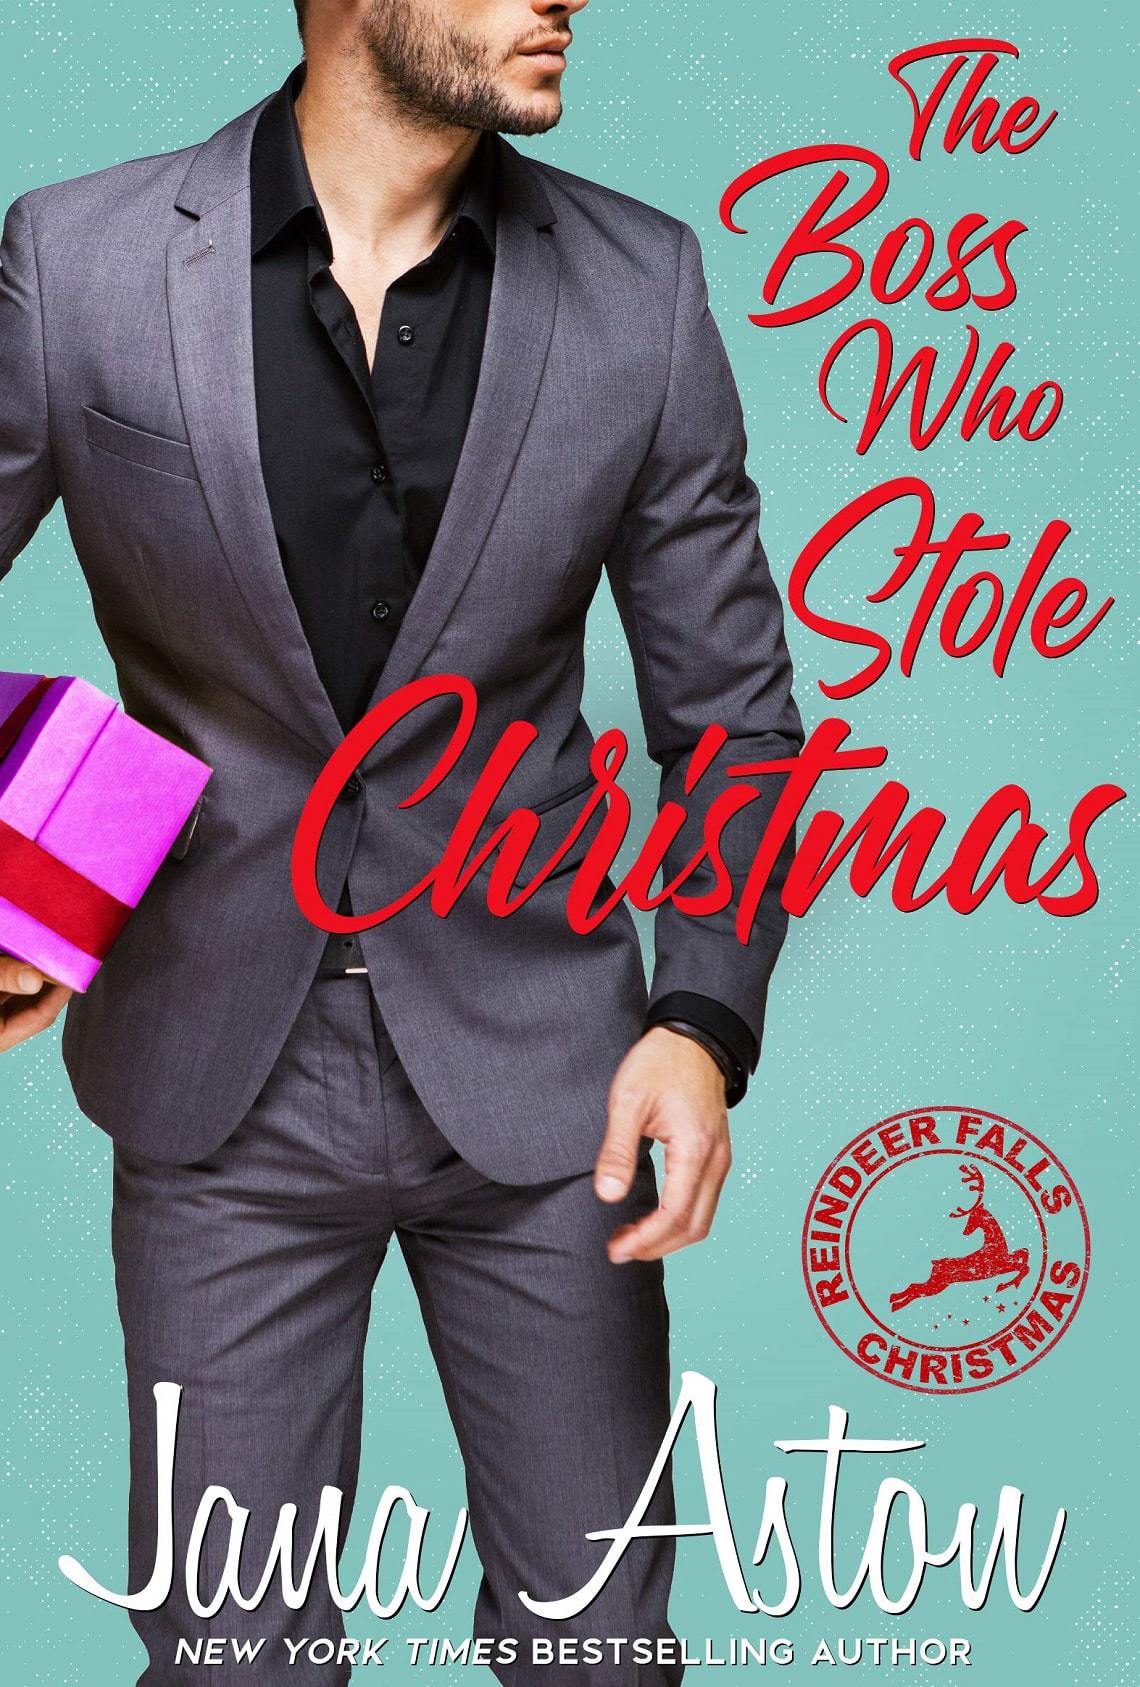 The Boss Who Stole Christmas Audiobook Free Download and Listen